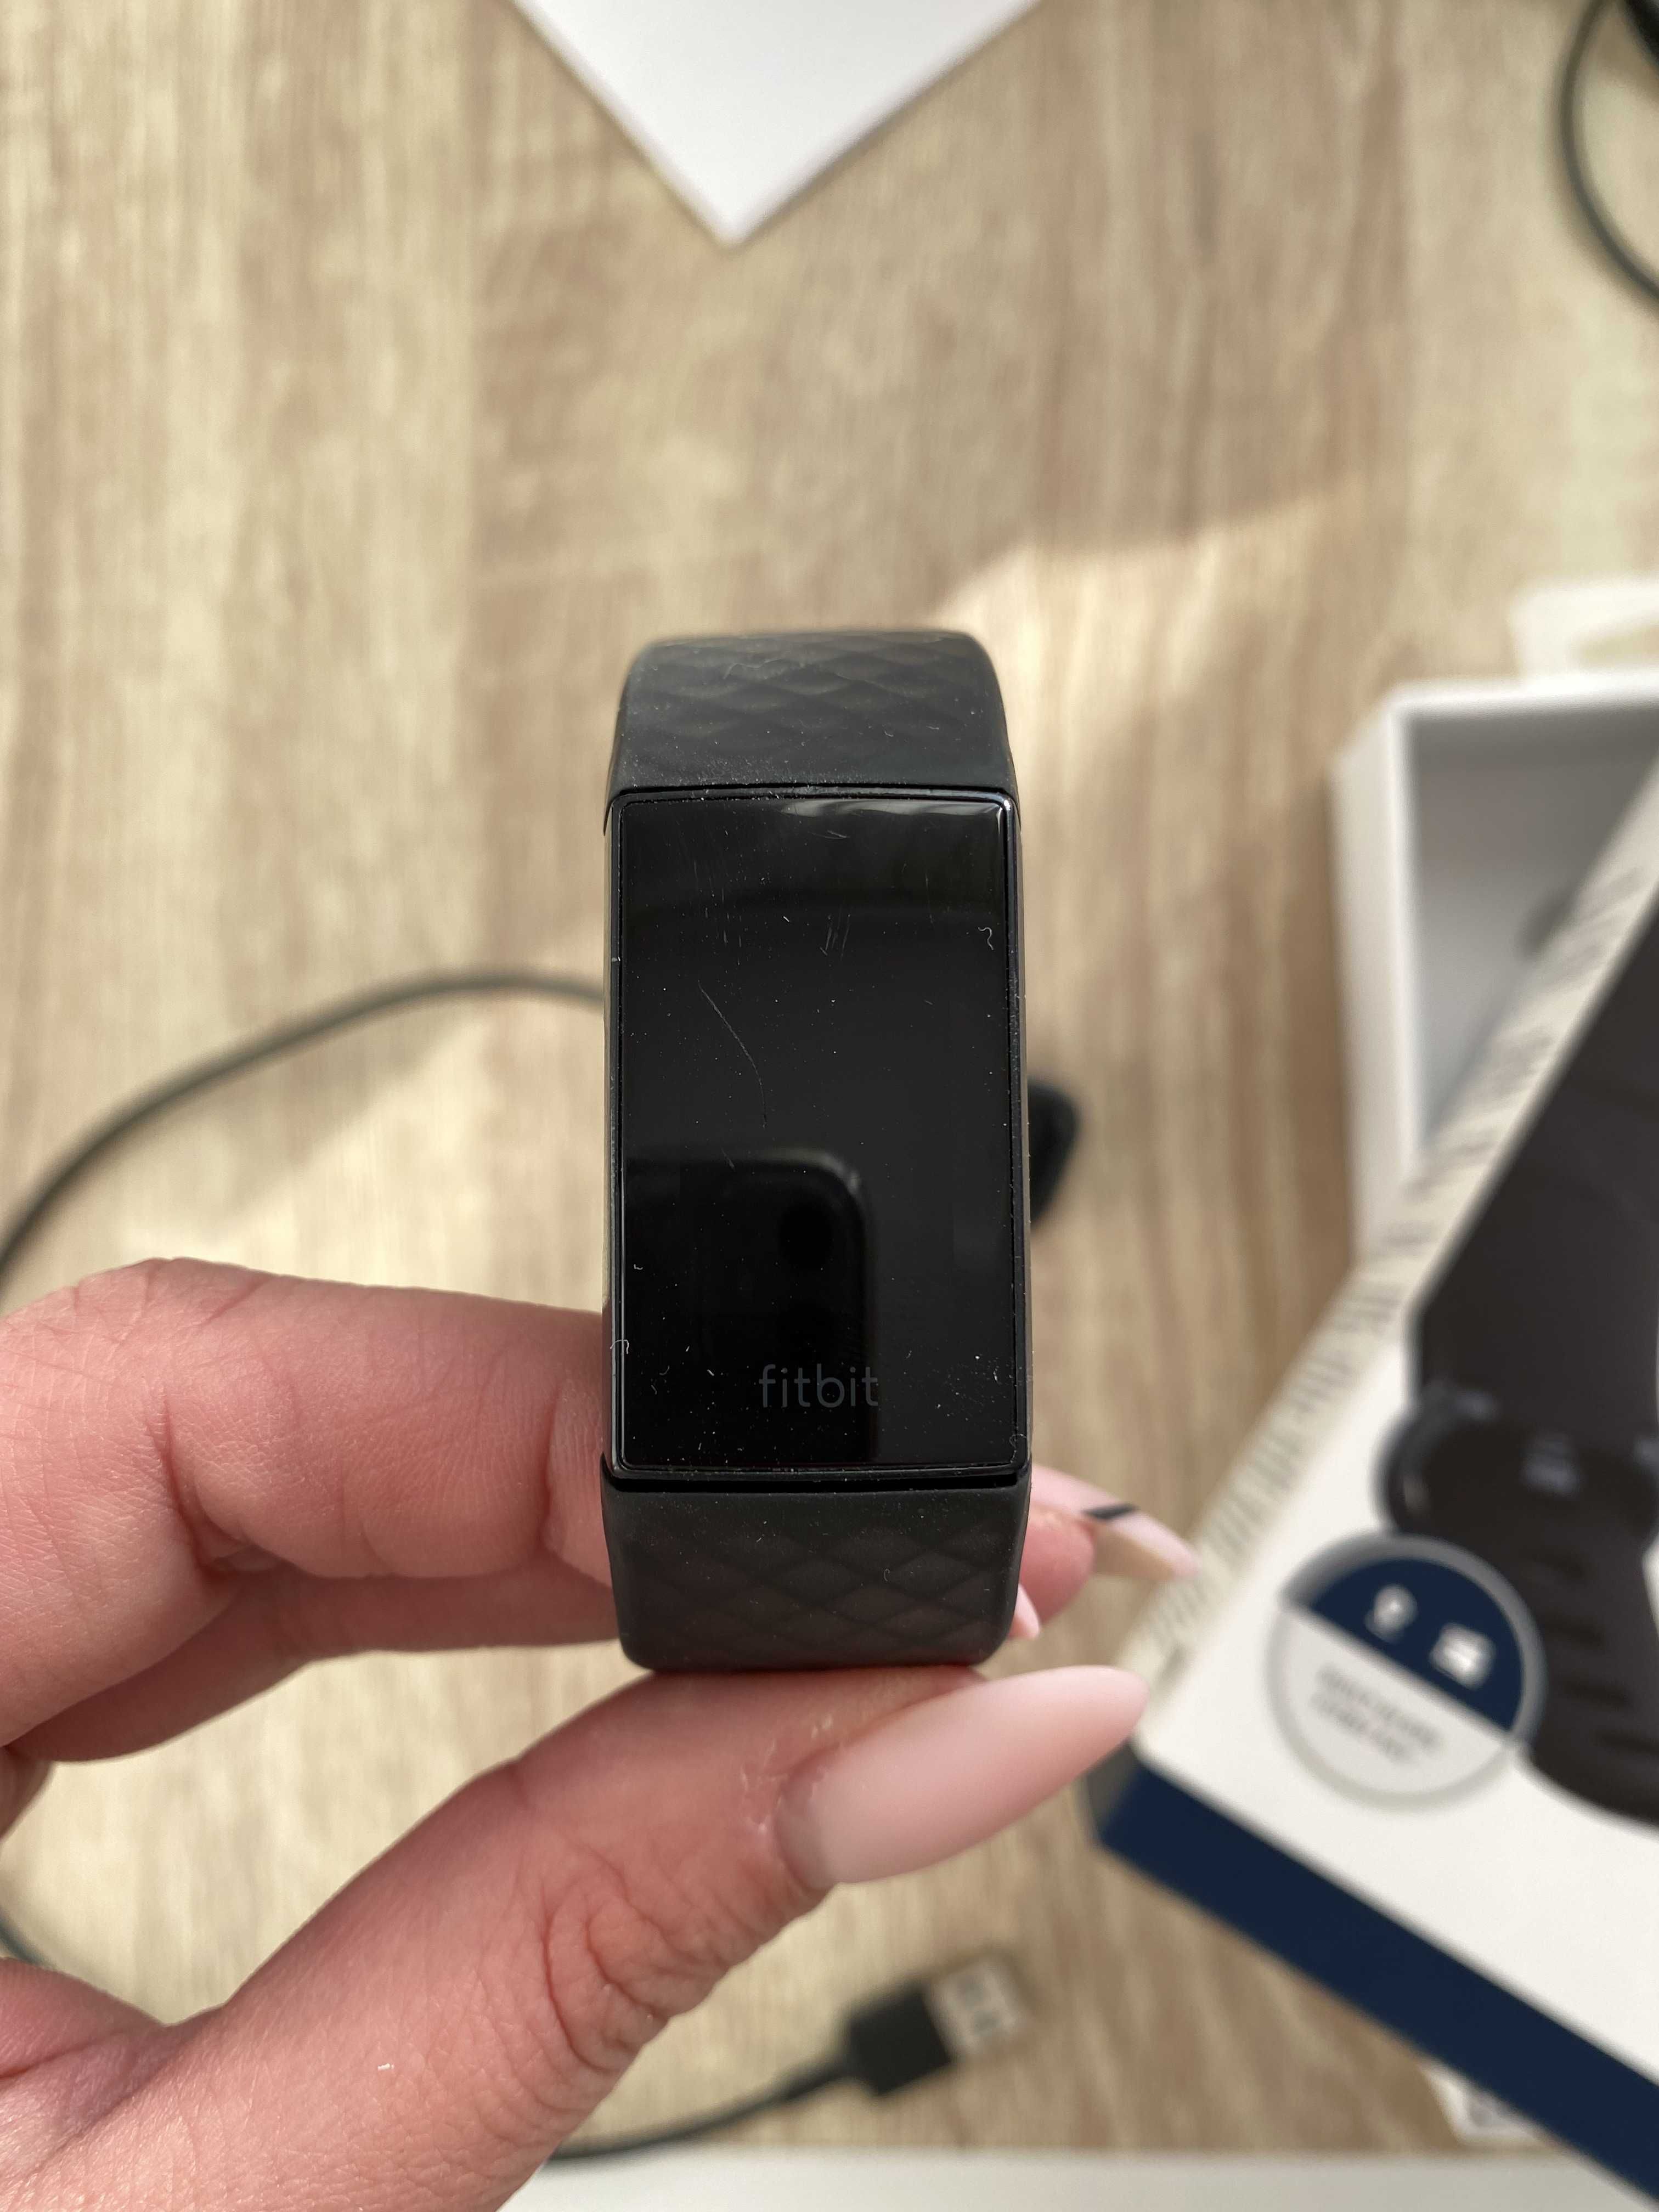 Smartband Fitbit Charge 4